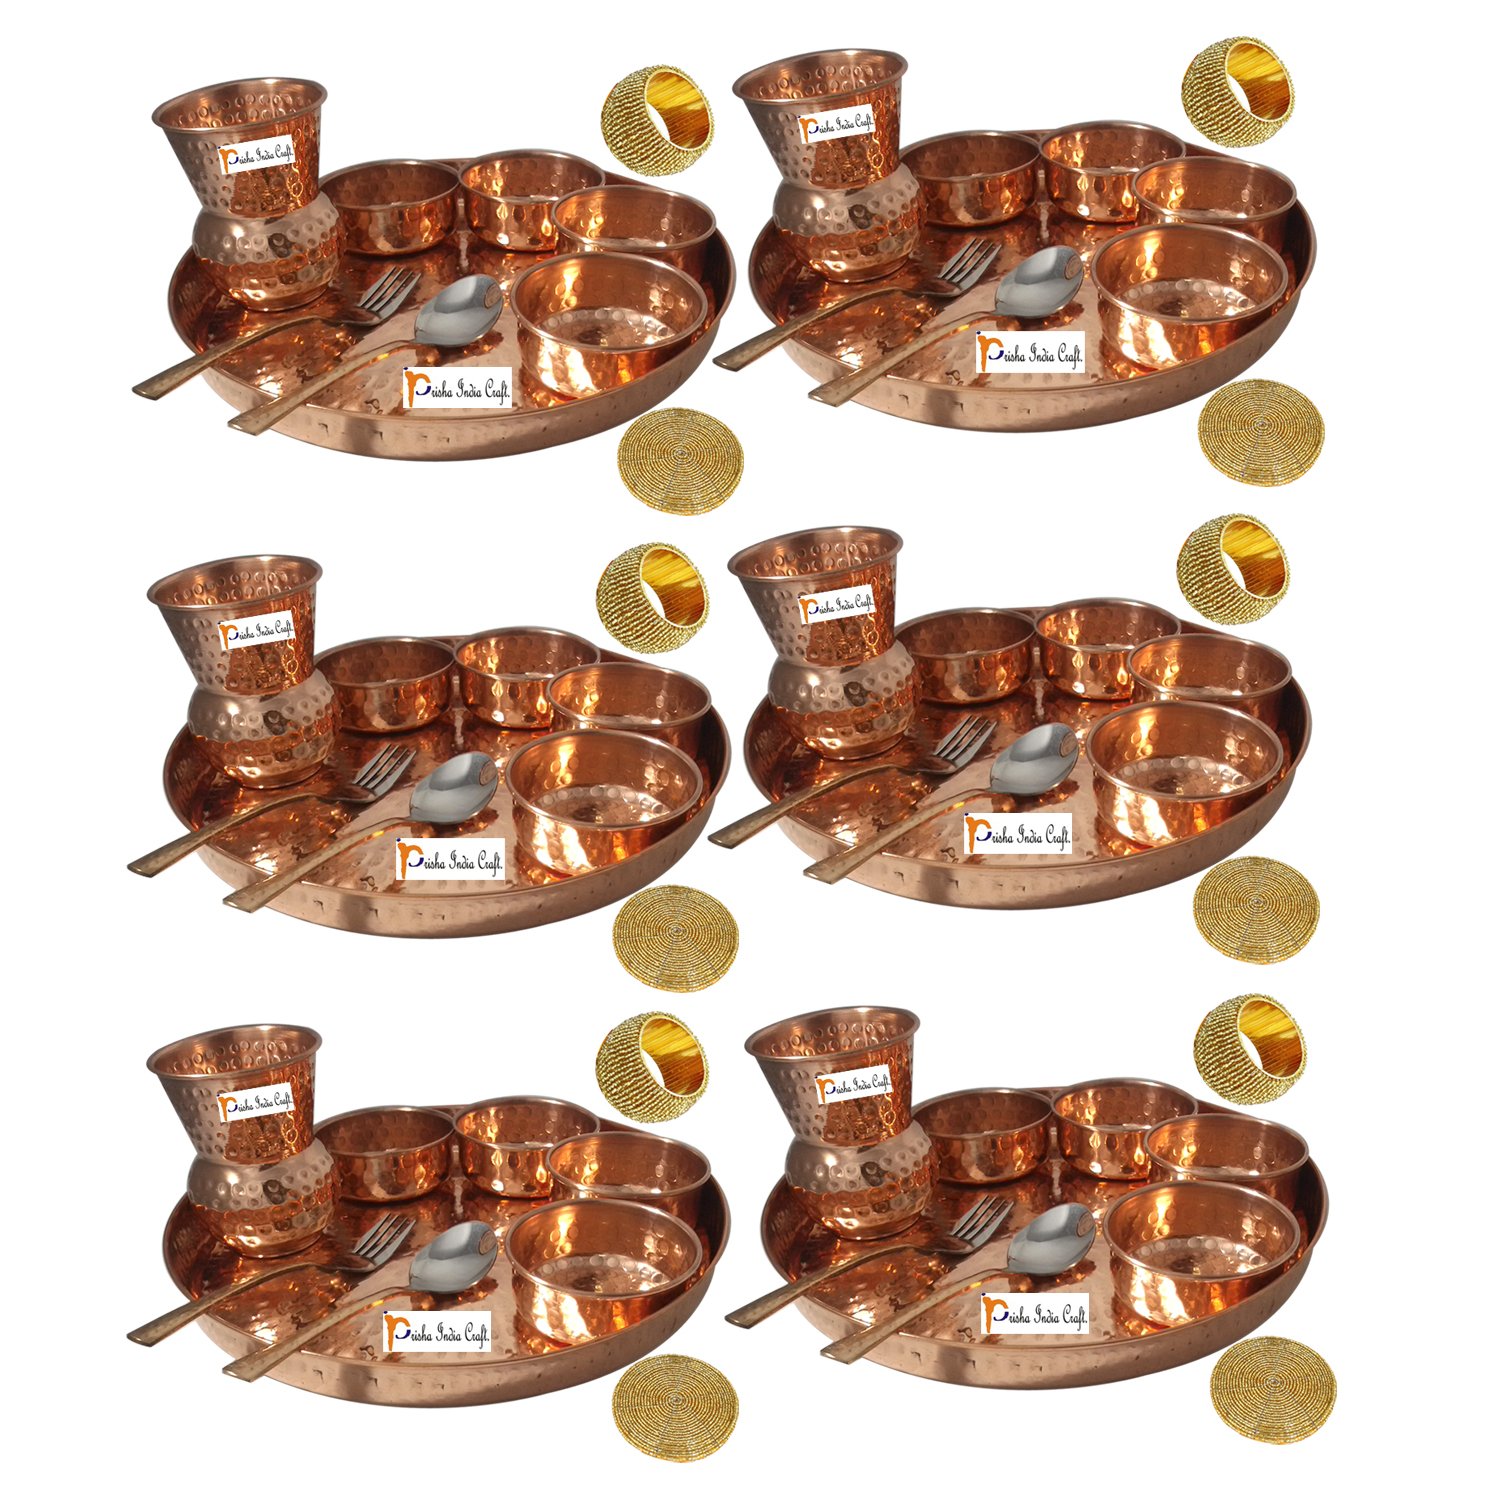 Prisha India Craft ® Set of 6 Traditional Indian Dinnerware Pure Copper Dinner Set of Thali Plate, Bowl, Spoon, Fork, Glass - Diameter 12 Inch